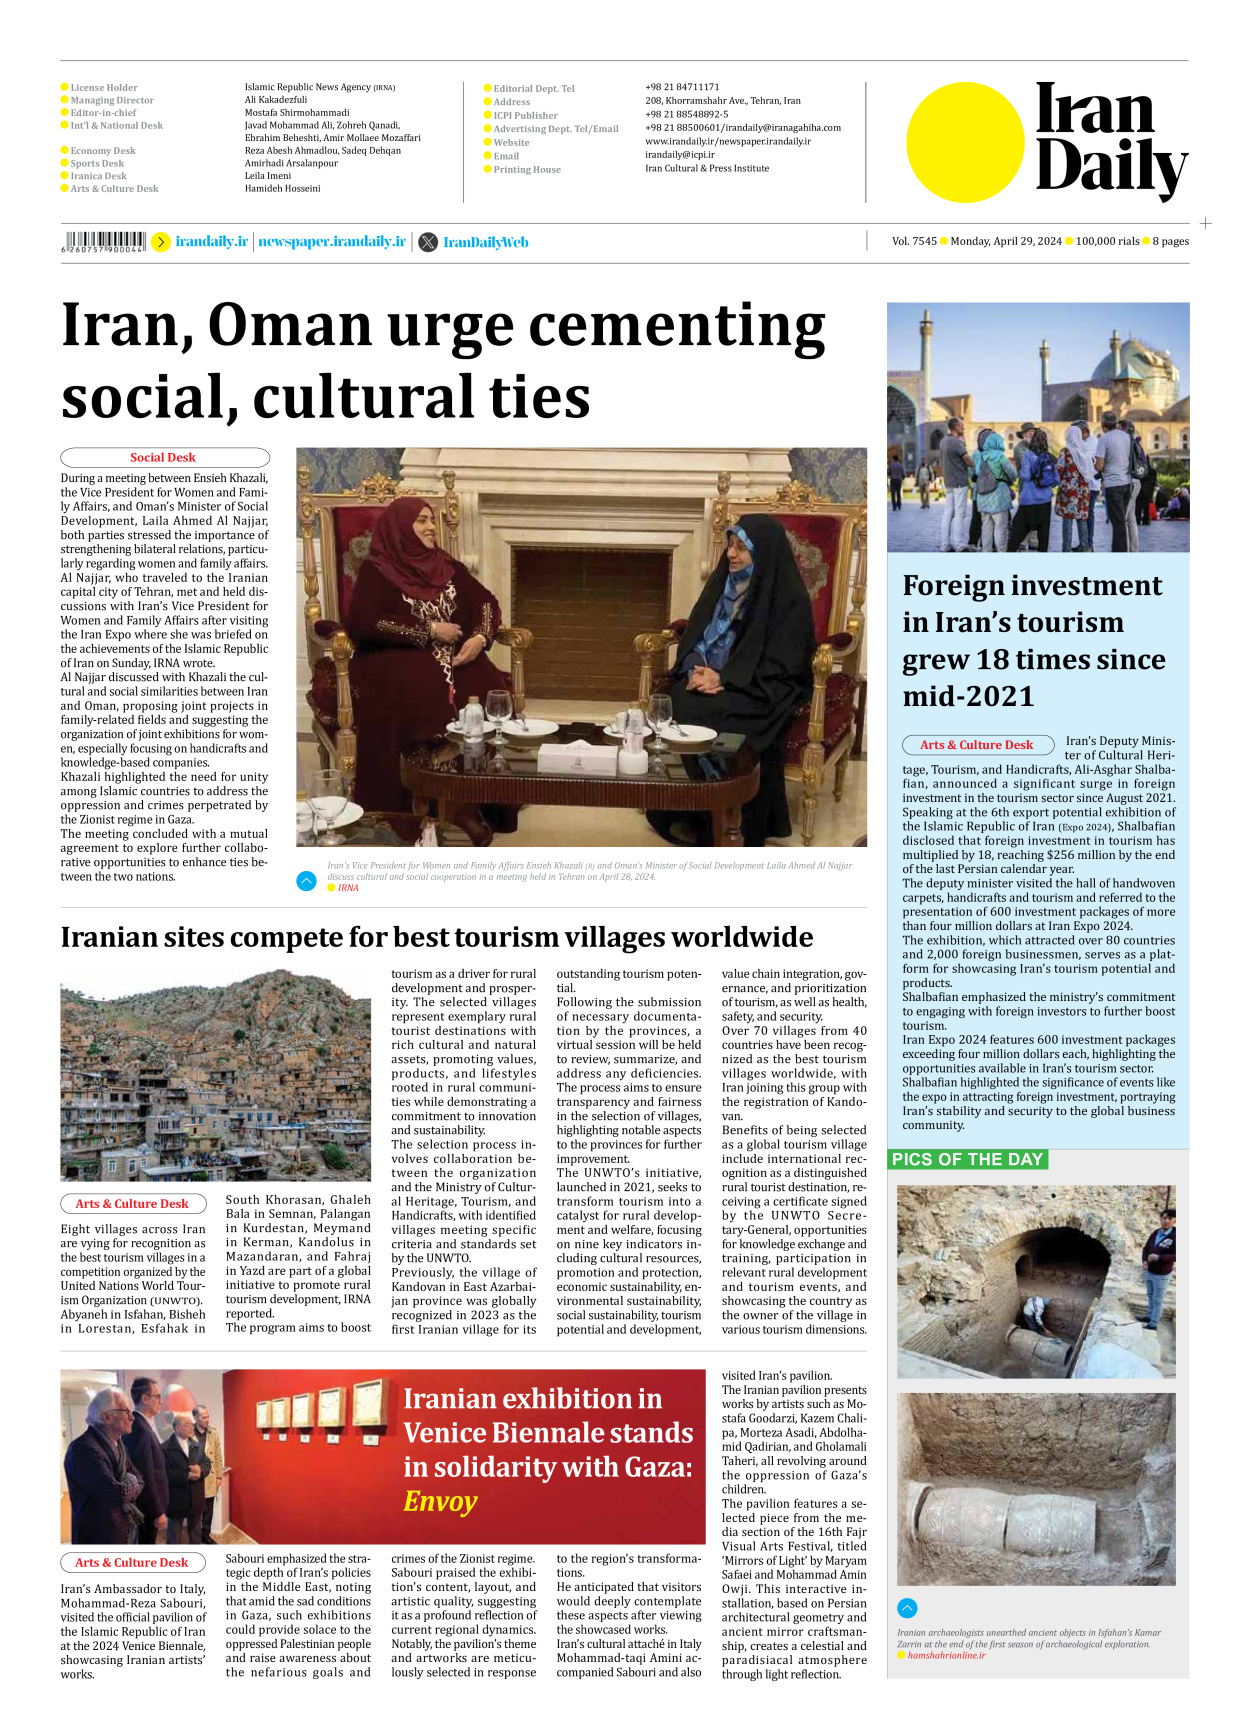 Iran Daily - Number Seven Thousand Five Hundred and Forty Five - 29 April 2024 - Page 8